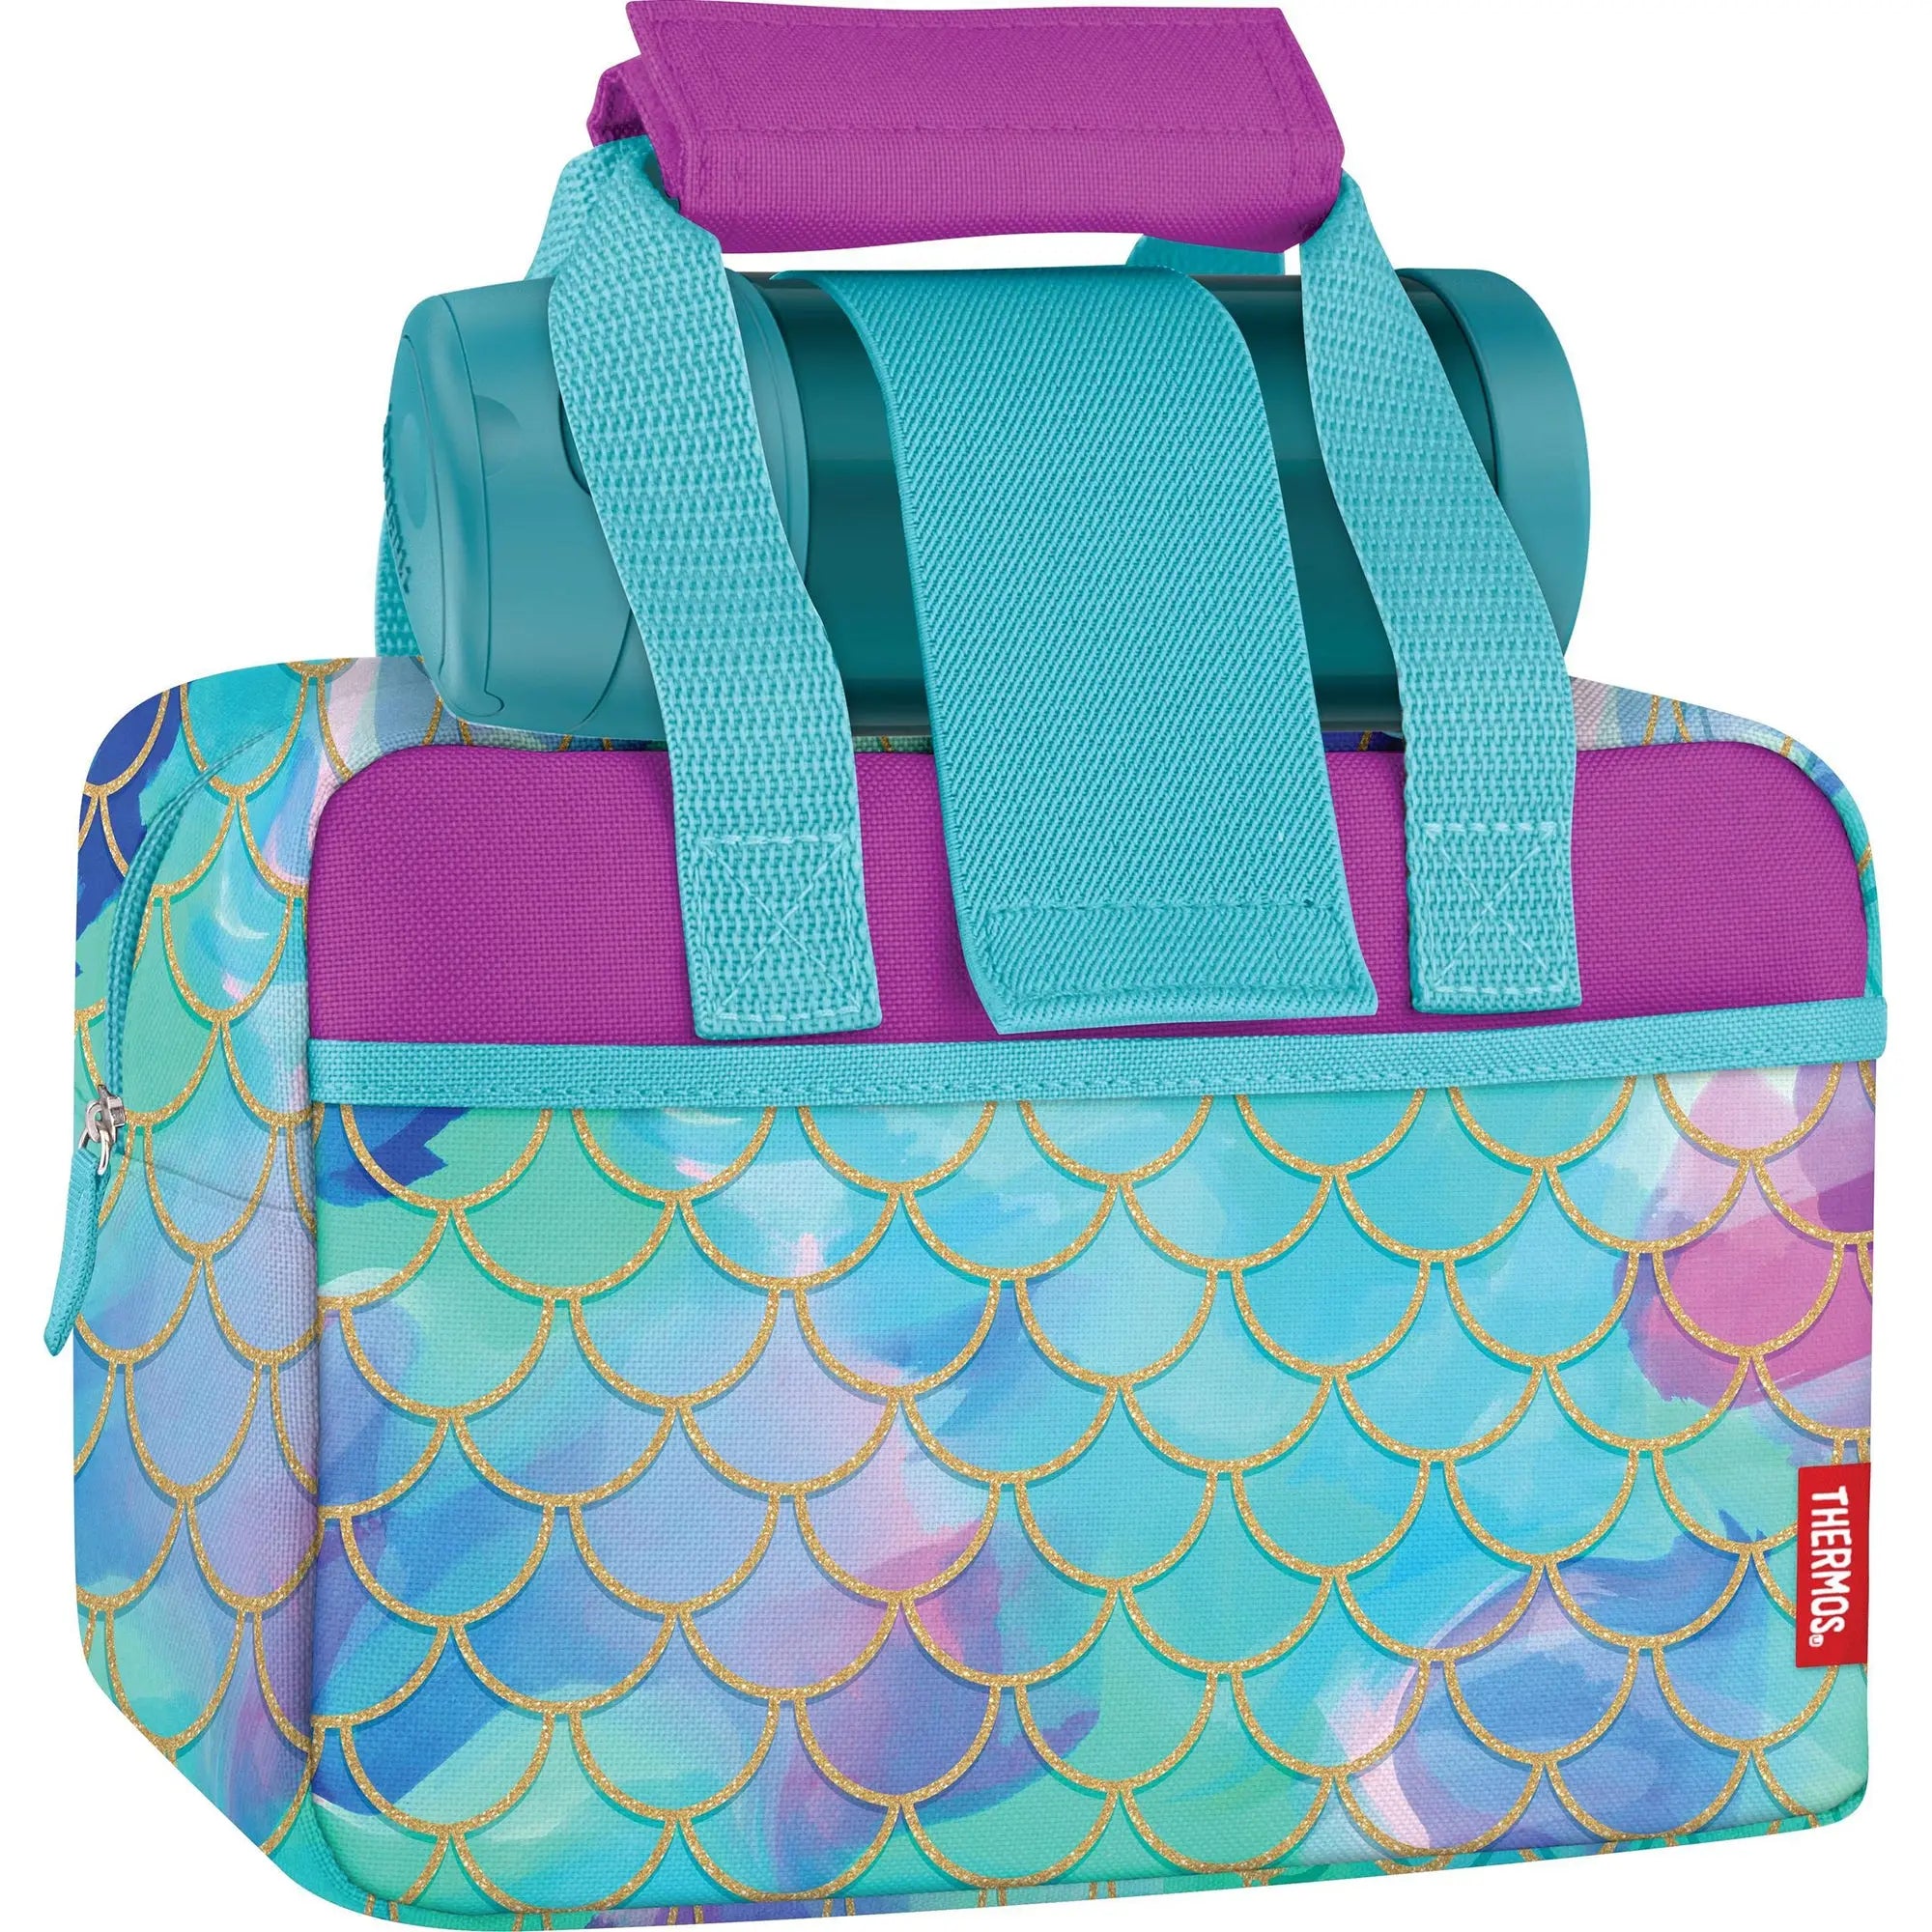 Thermos Kid's Funtainer Mermaid Lunch Duffle Bag and Bottle Set - Mermaid/Teal Thermos